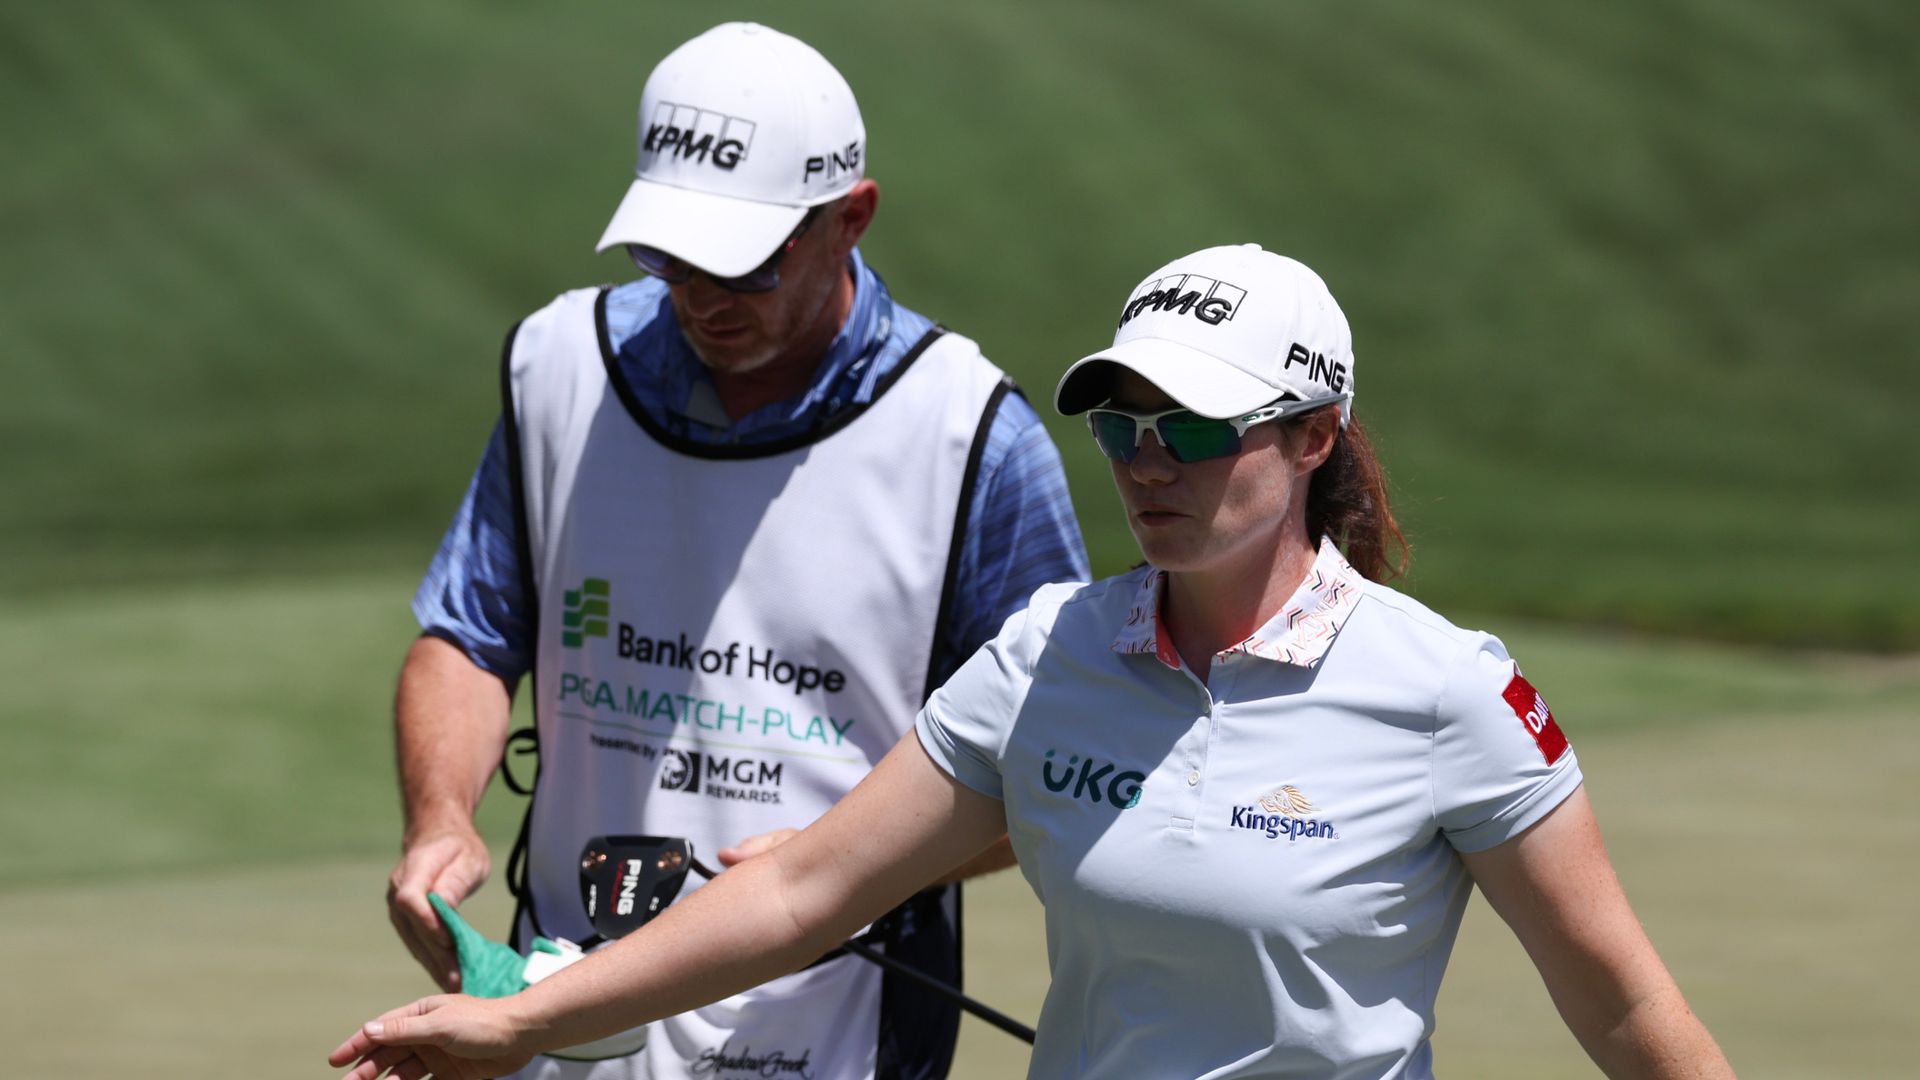 Maguire, Vu among winners on day one of LPGA Match-Play